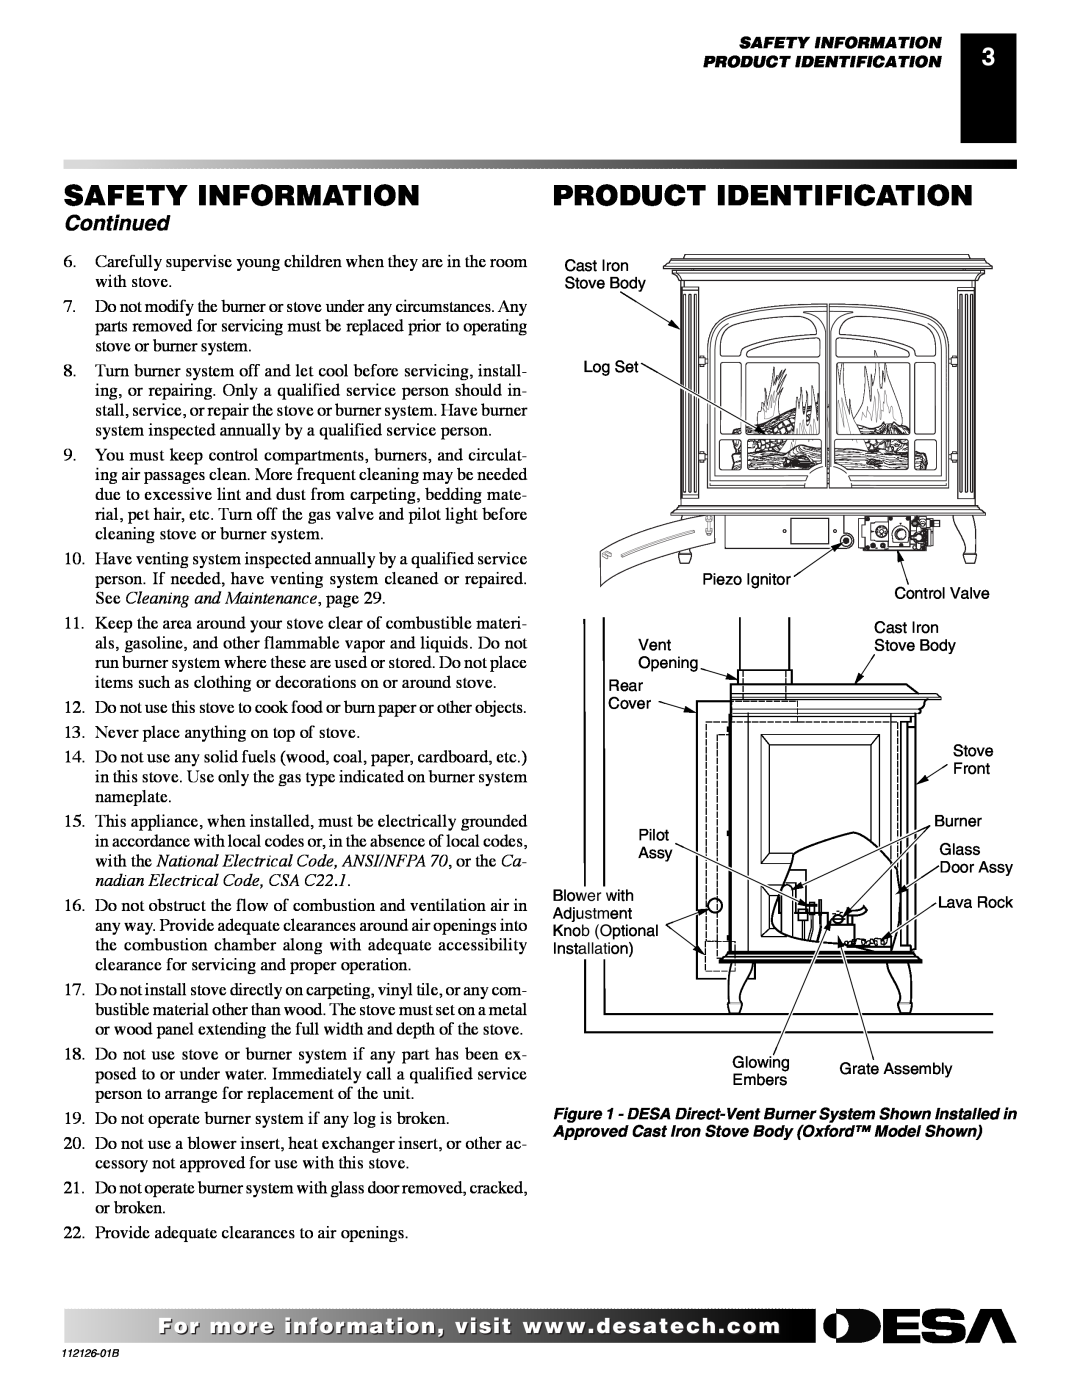 Desa SDVBPD, SDVBND Product Identification, Continued, Safety Information, See Cleaning and Maintenance, page 